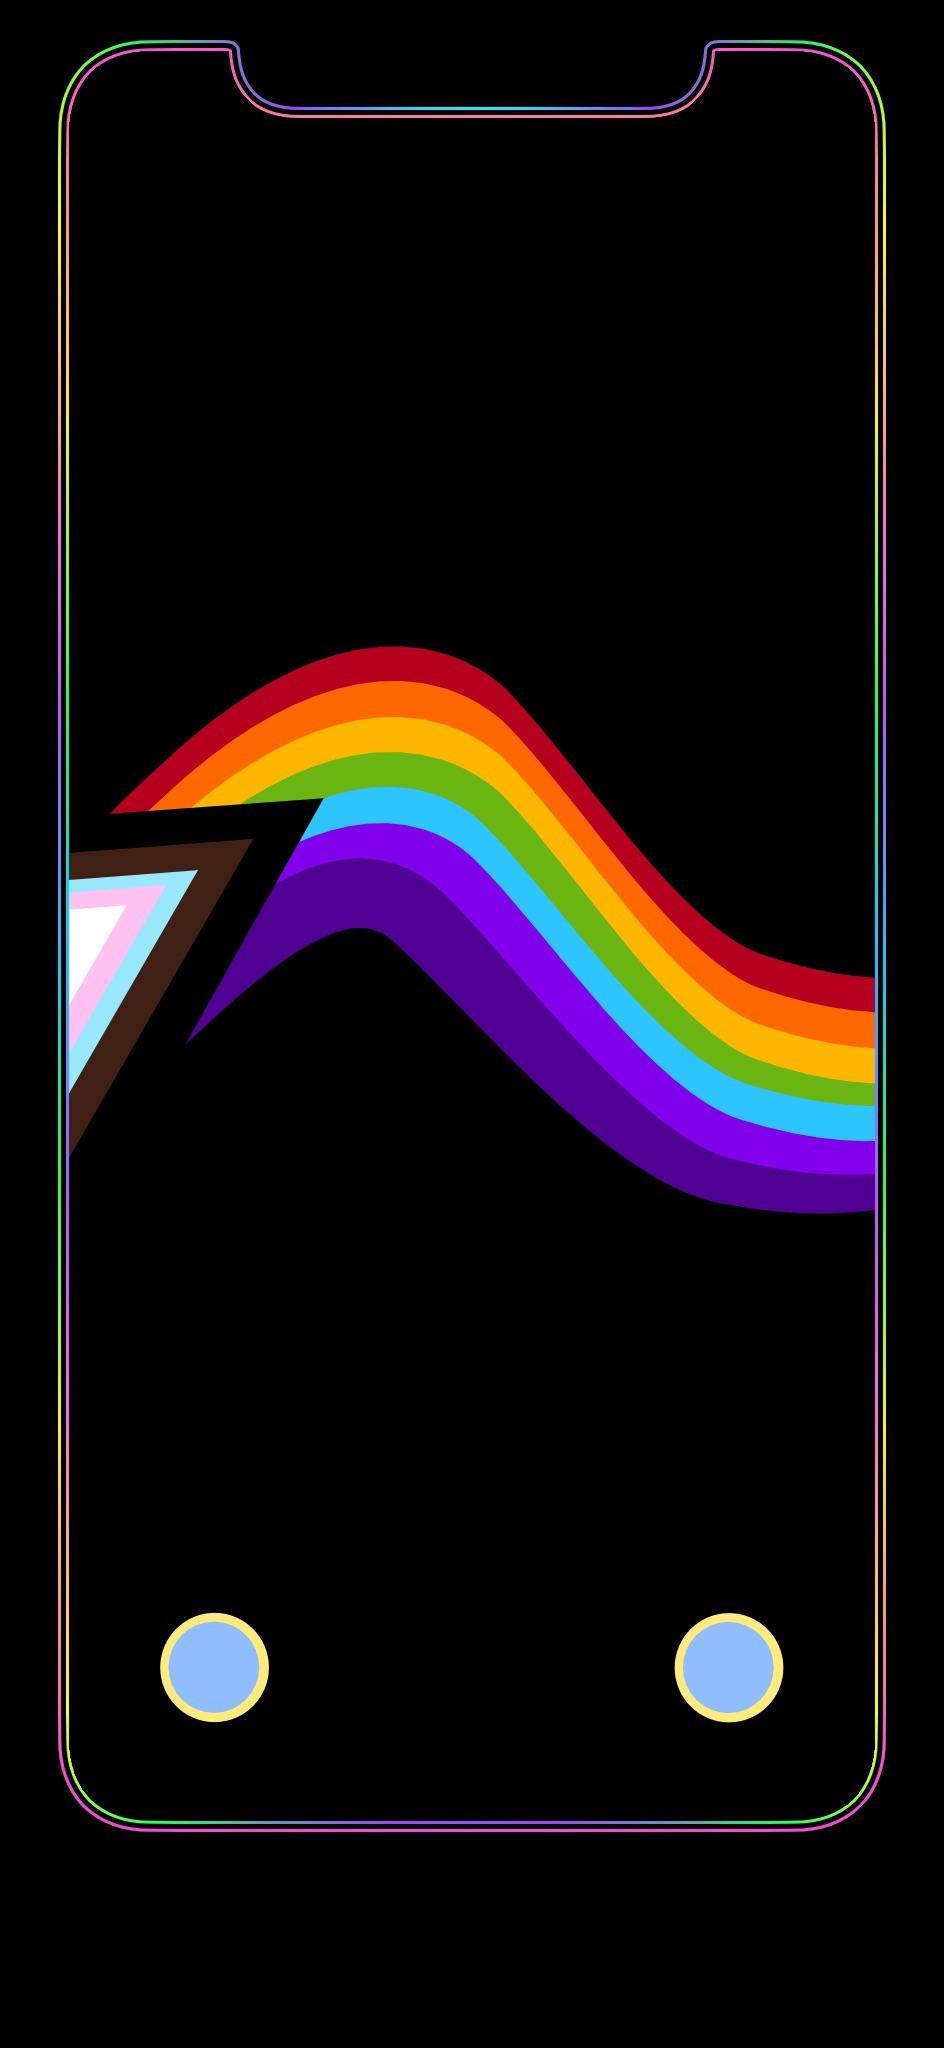 LGBTQ+ Pride Flag w/ border link in comments